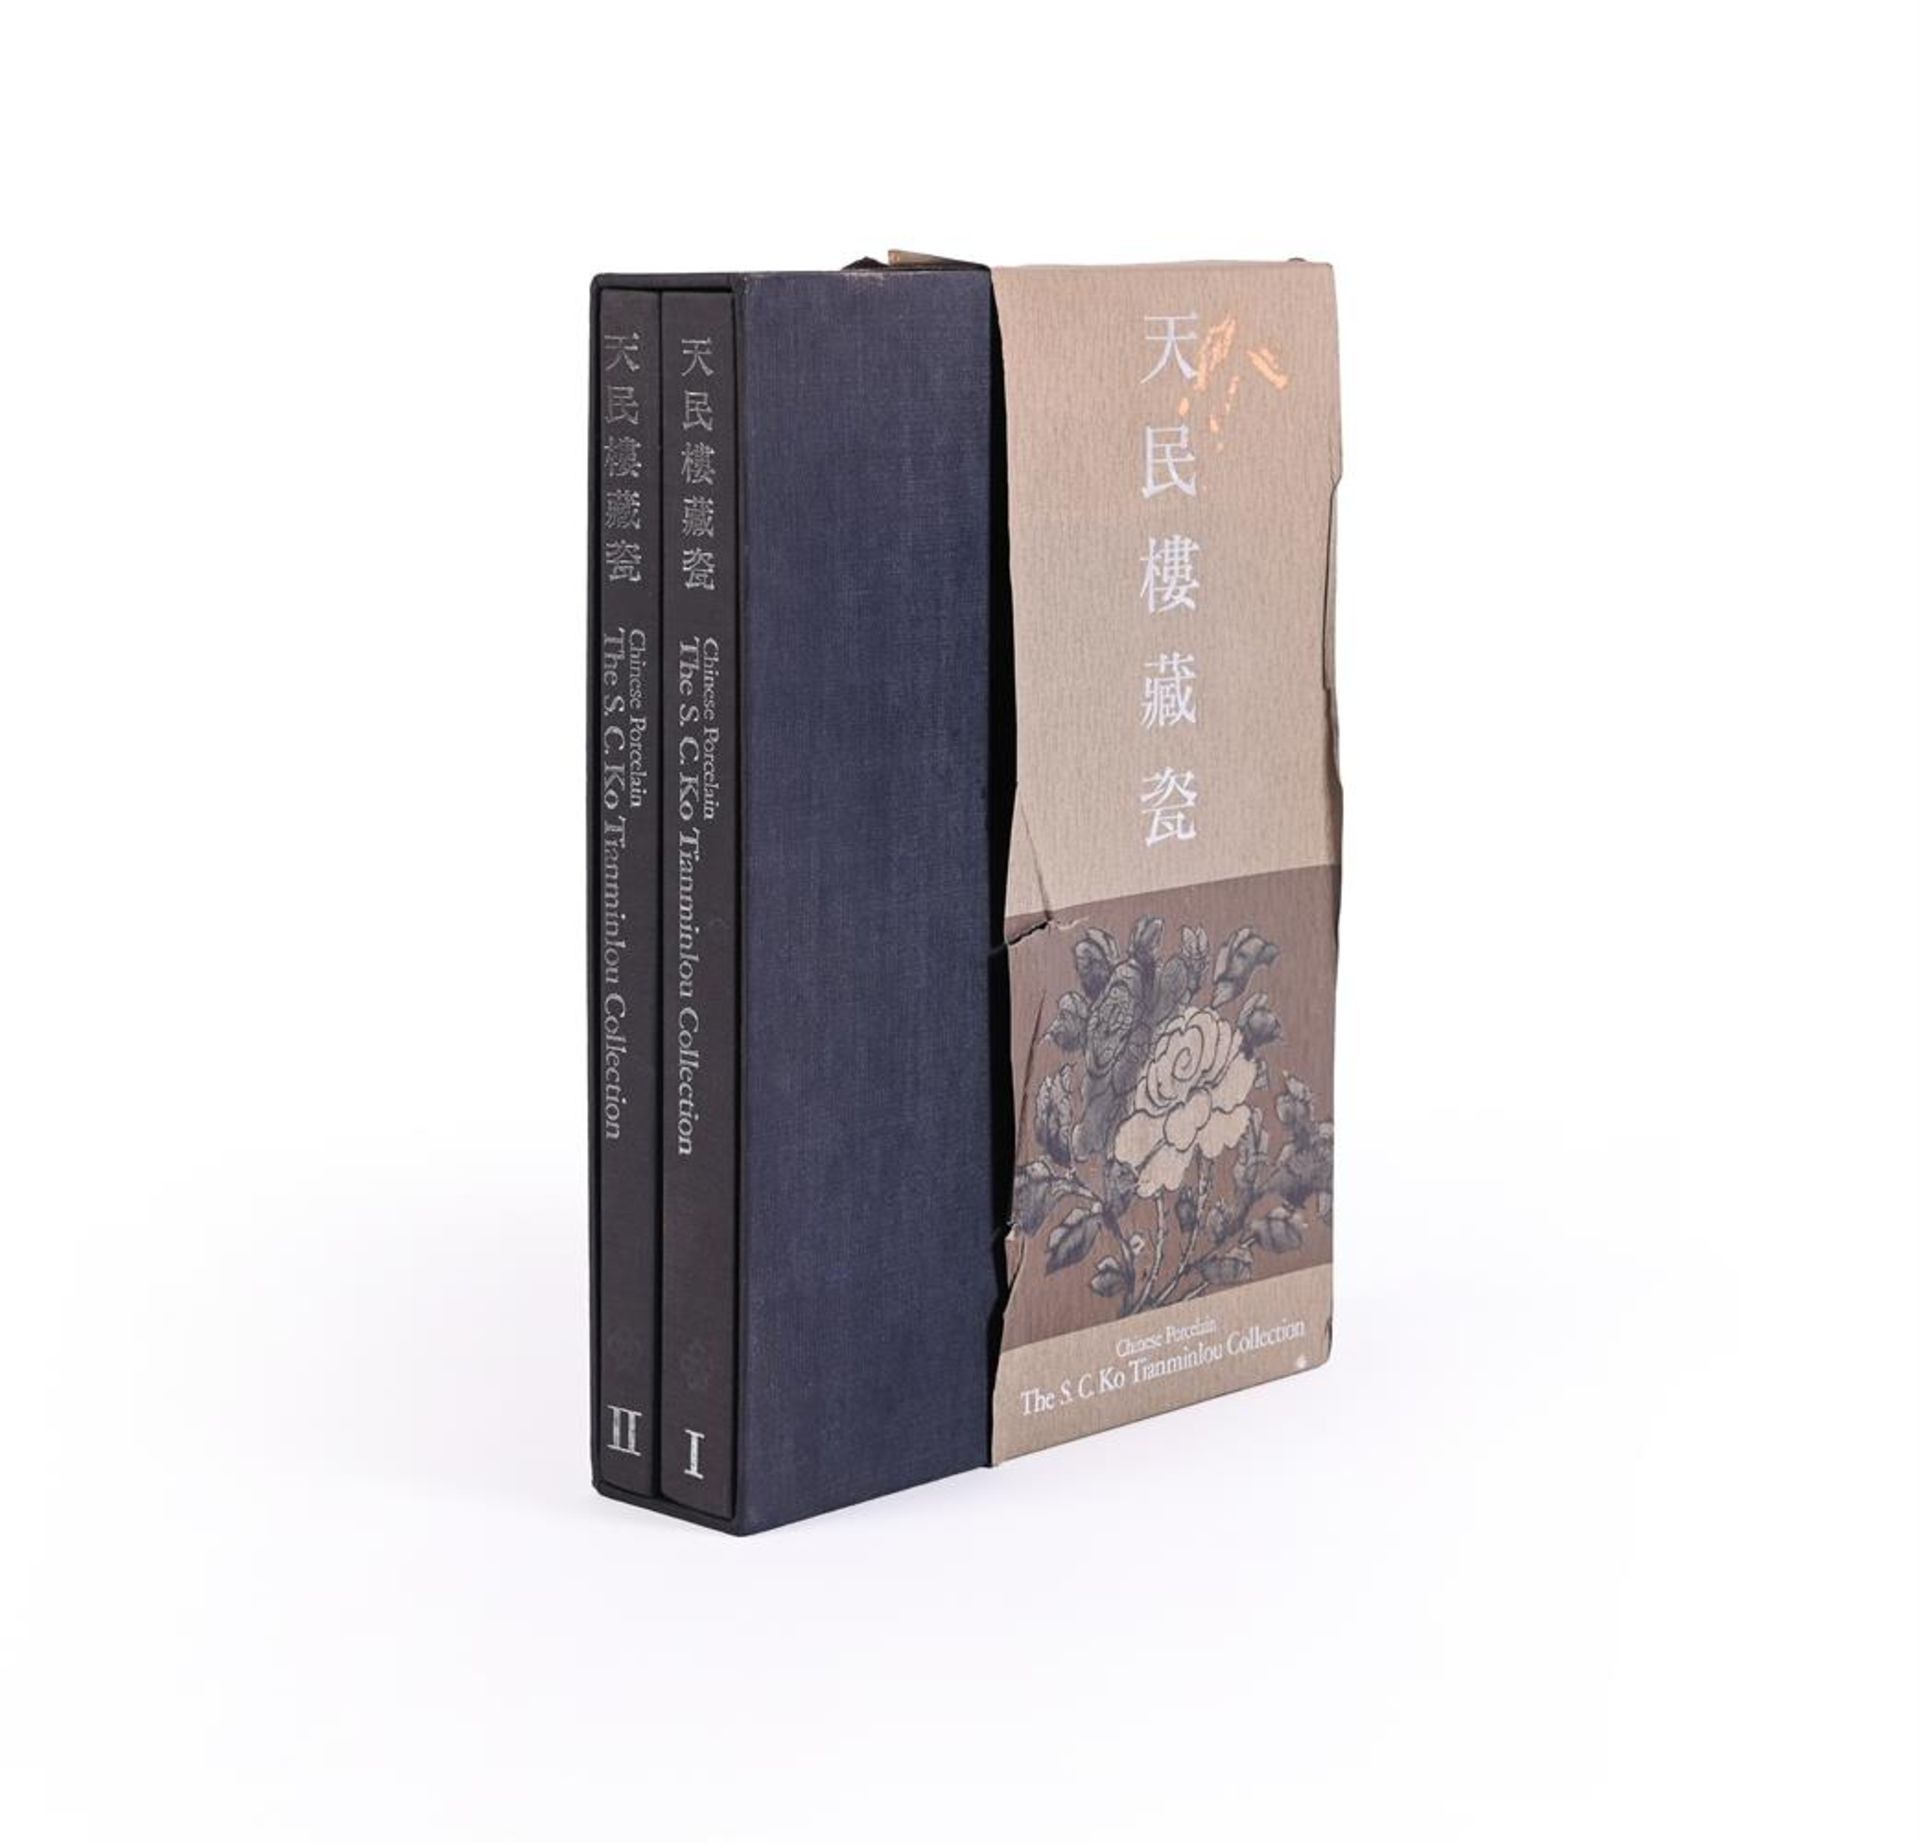 Ɵ The S.C. Ko Tianminlou Collection (Volumes I & II) - Image 2 of 2